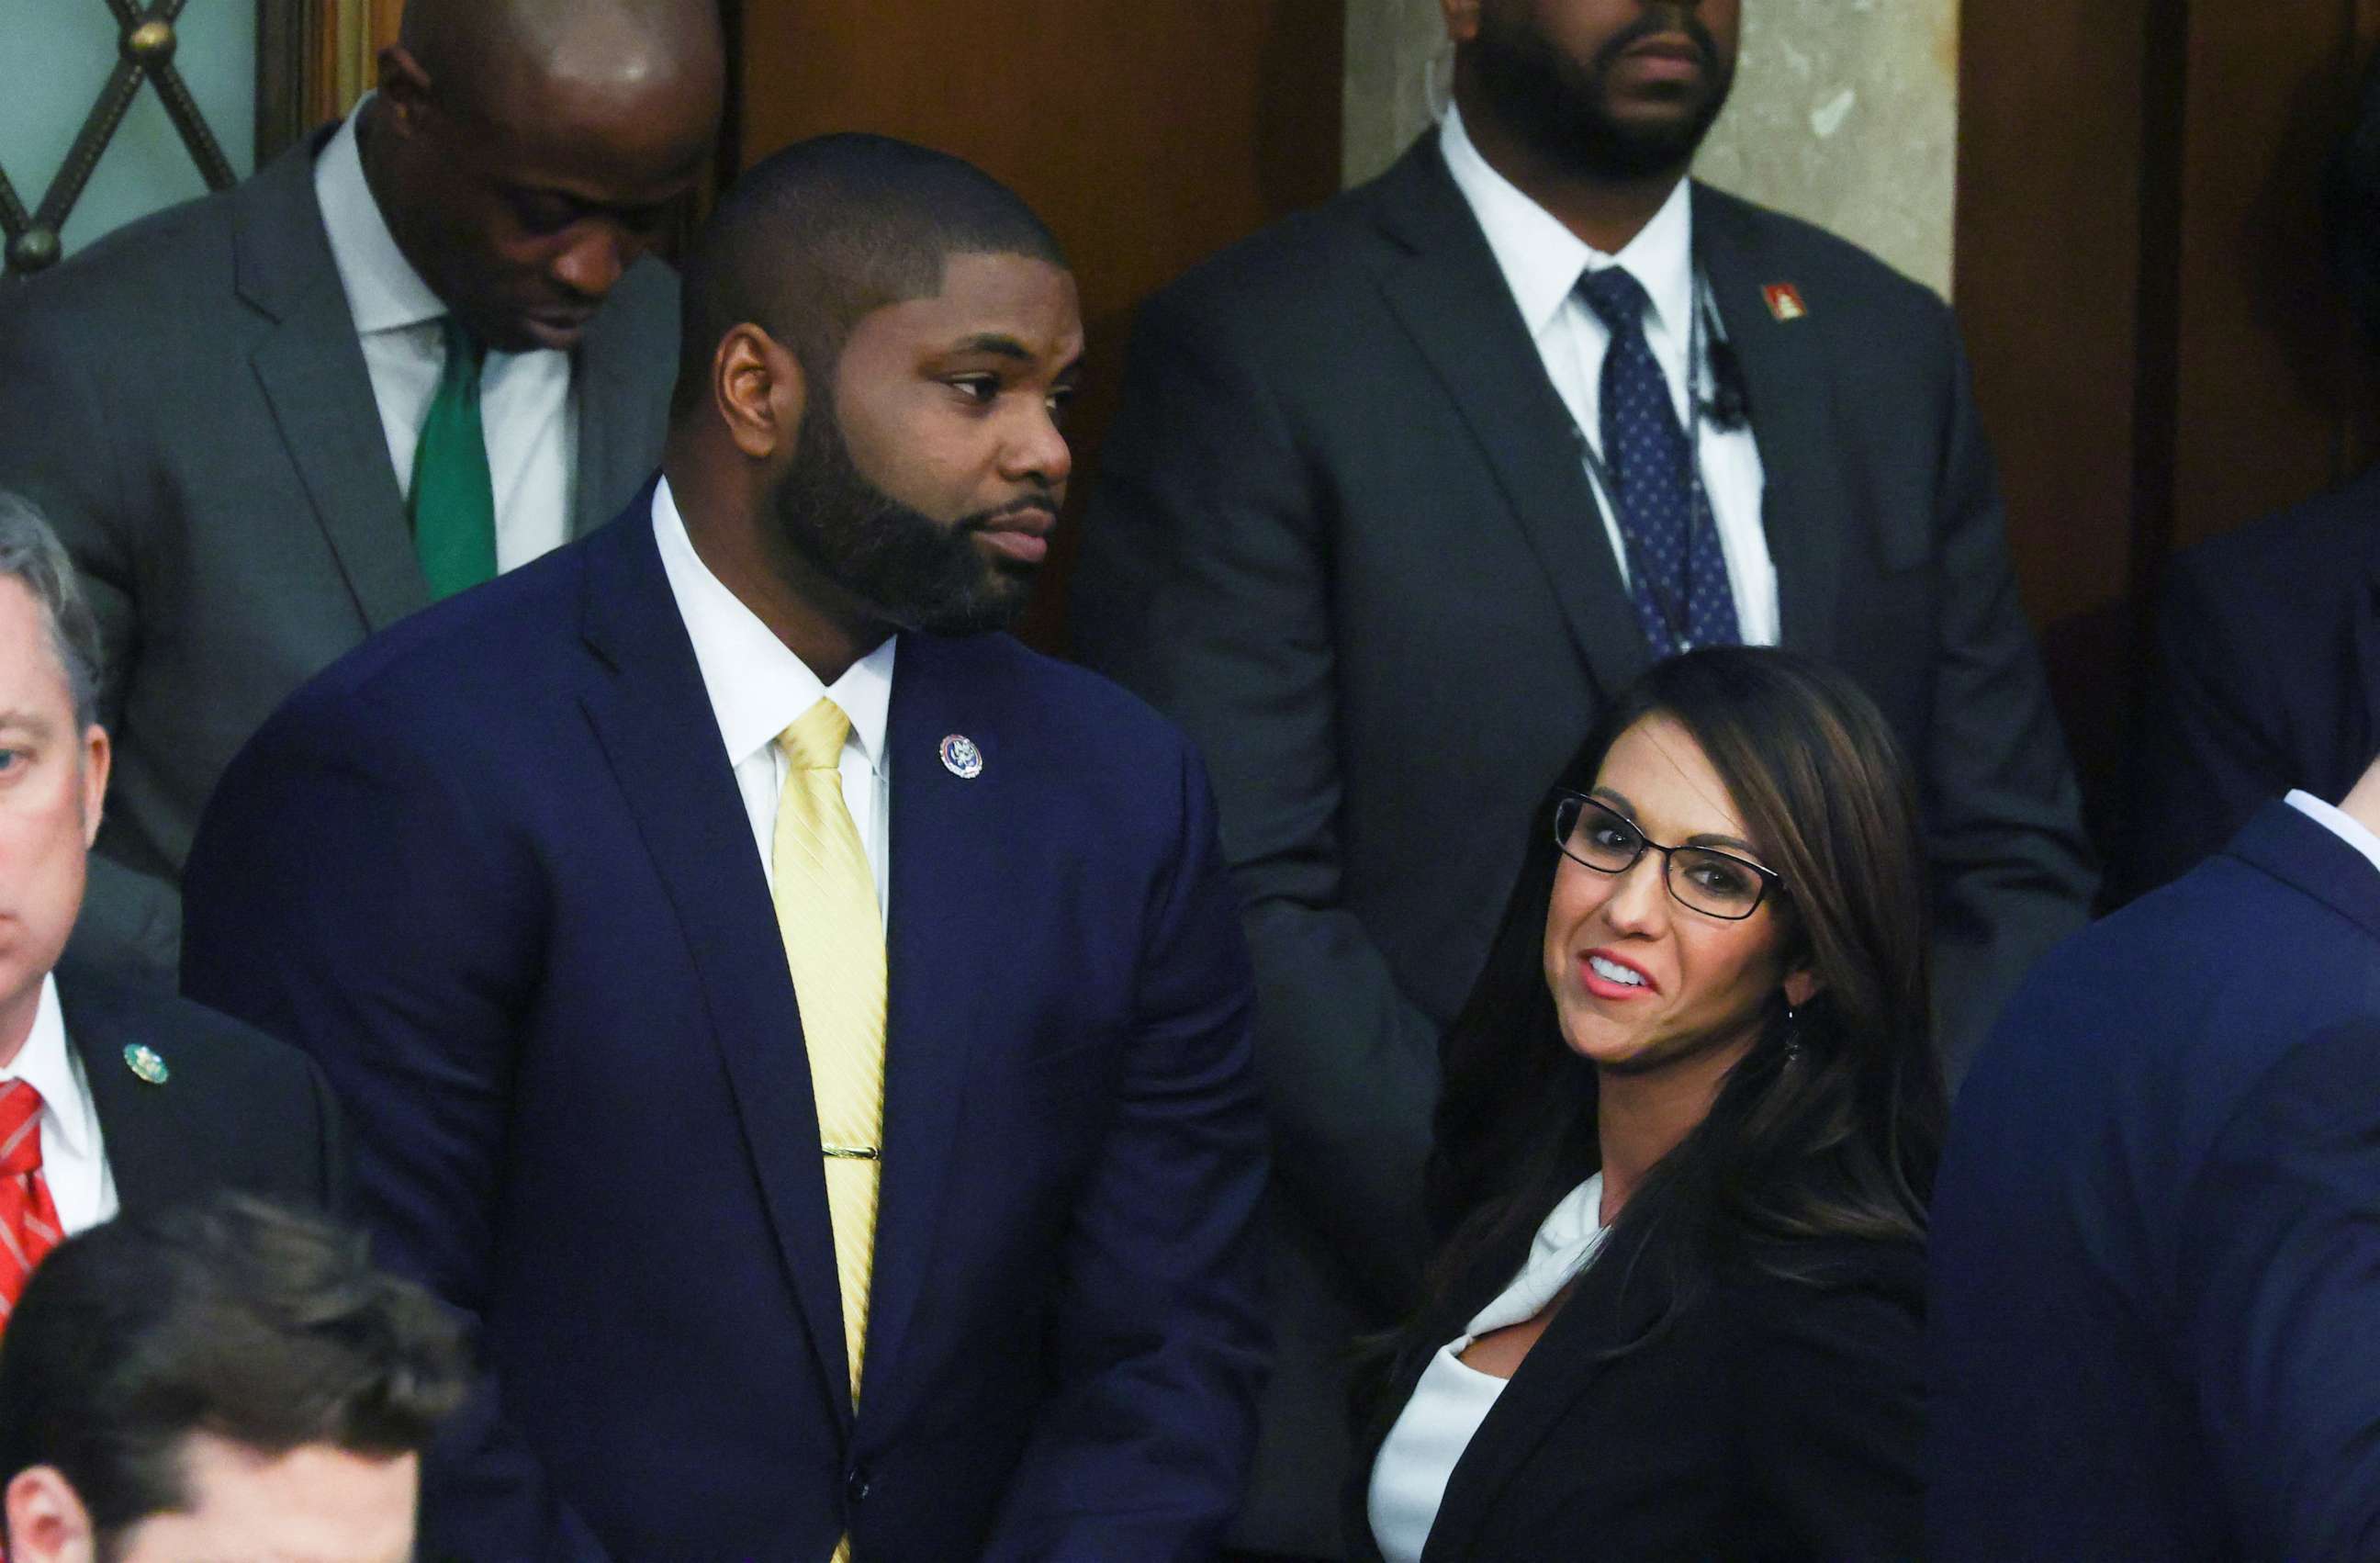 PHOTO: U.S. Rep. Byron Donalds talks with Rep. Lauren Boebert after Donalds was nominated as a candidate for Speaker of the House during a fourth round of voting for a new Speaker at the U.S. Capitol in Washington, Jan. 4, 2023.